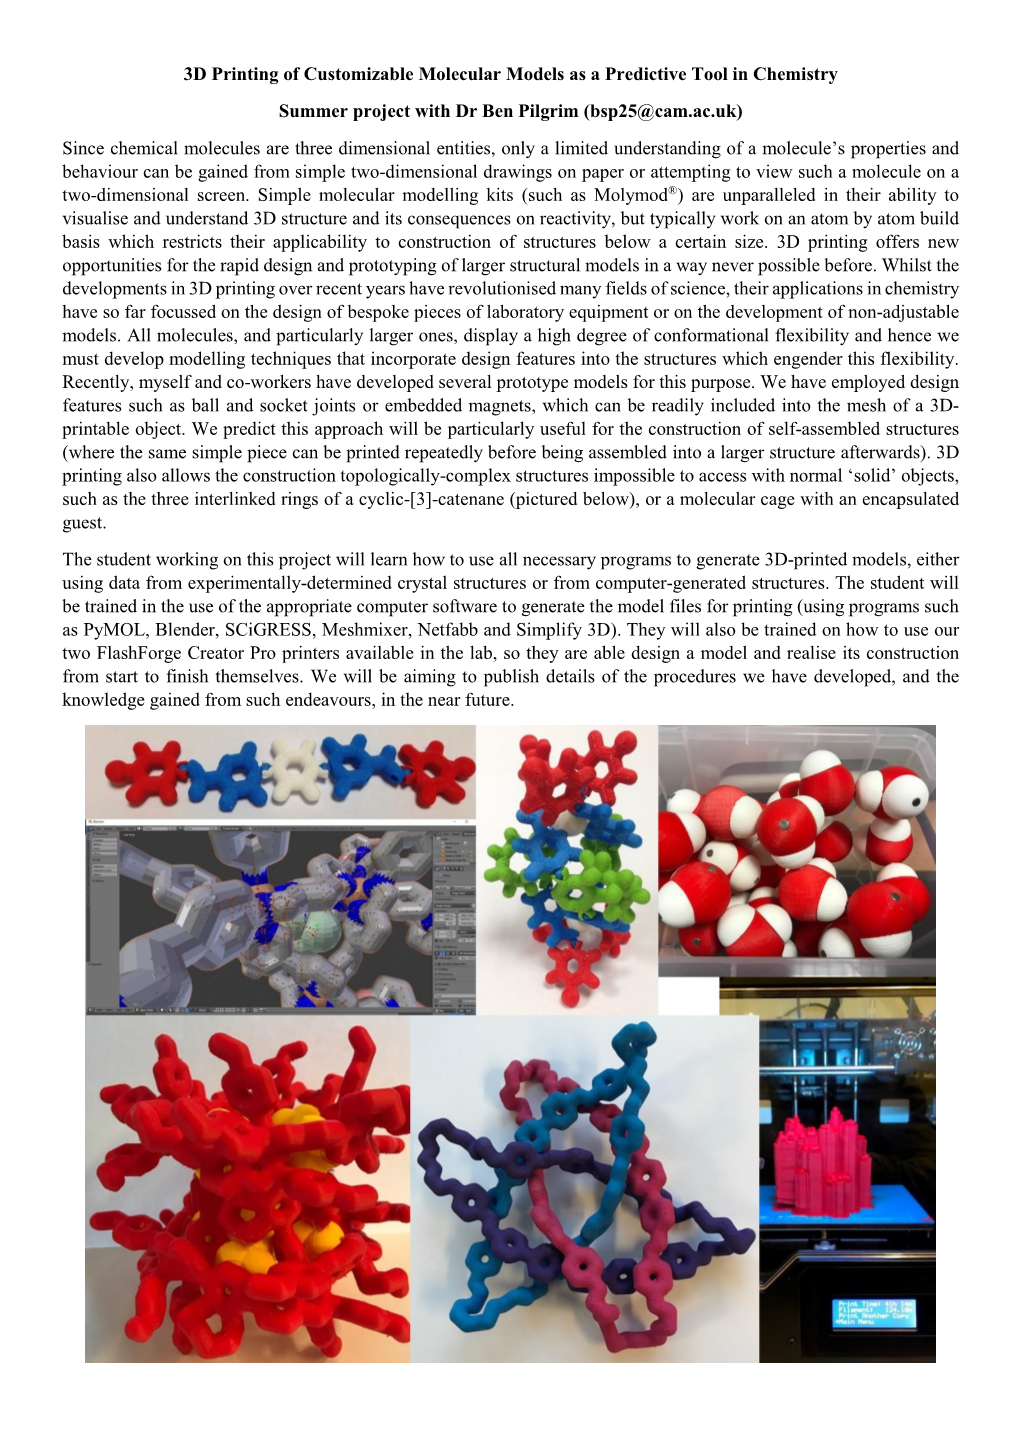 3D Printing of Customizable Molecular Models As a Predictive Tool In